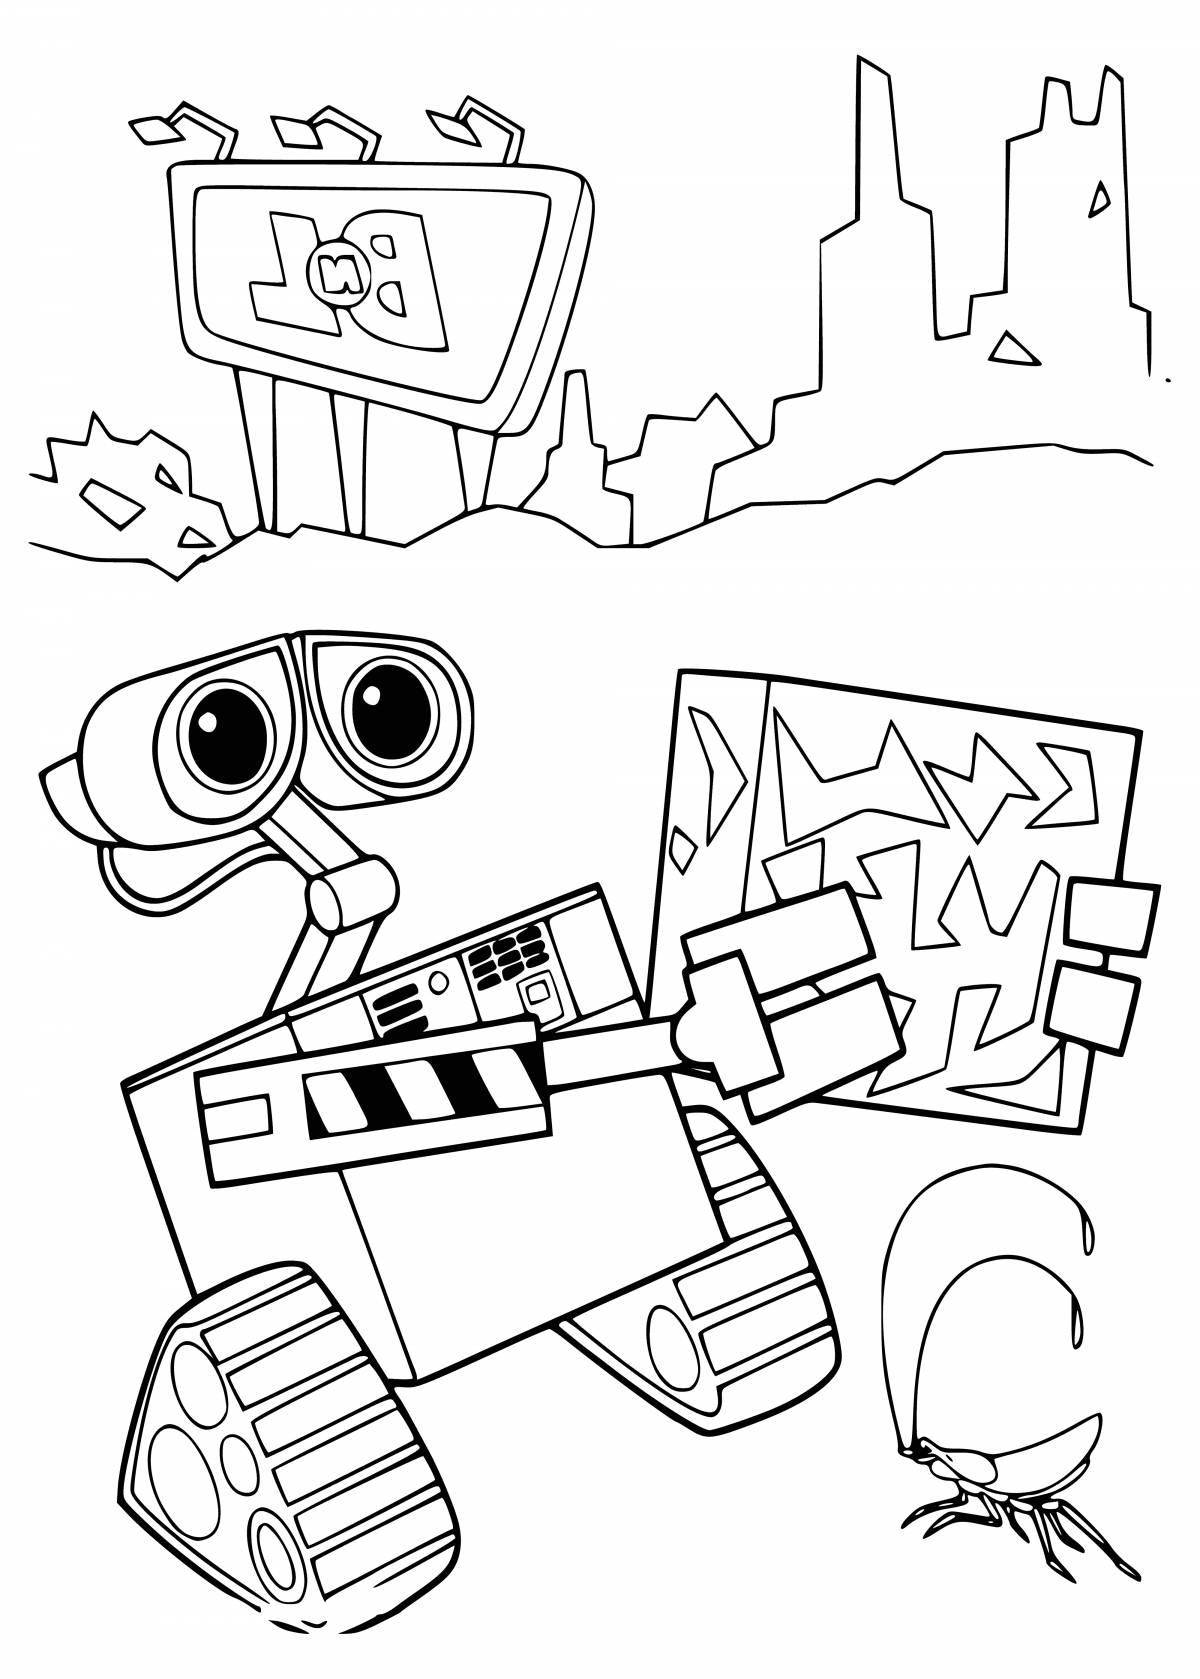 Funny wall coloring page